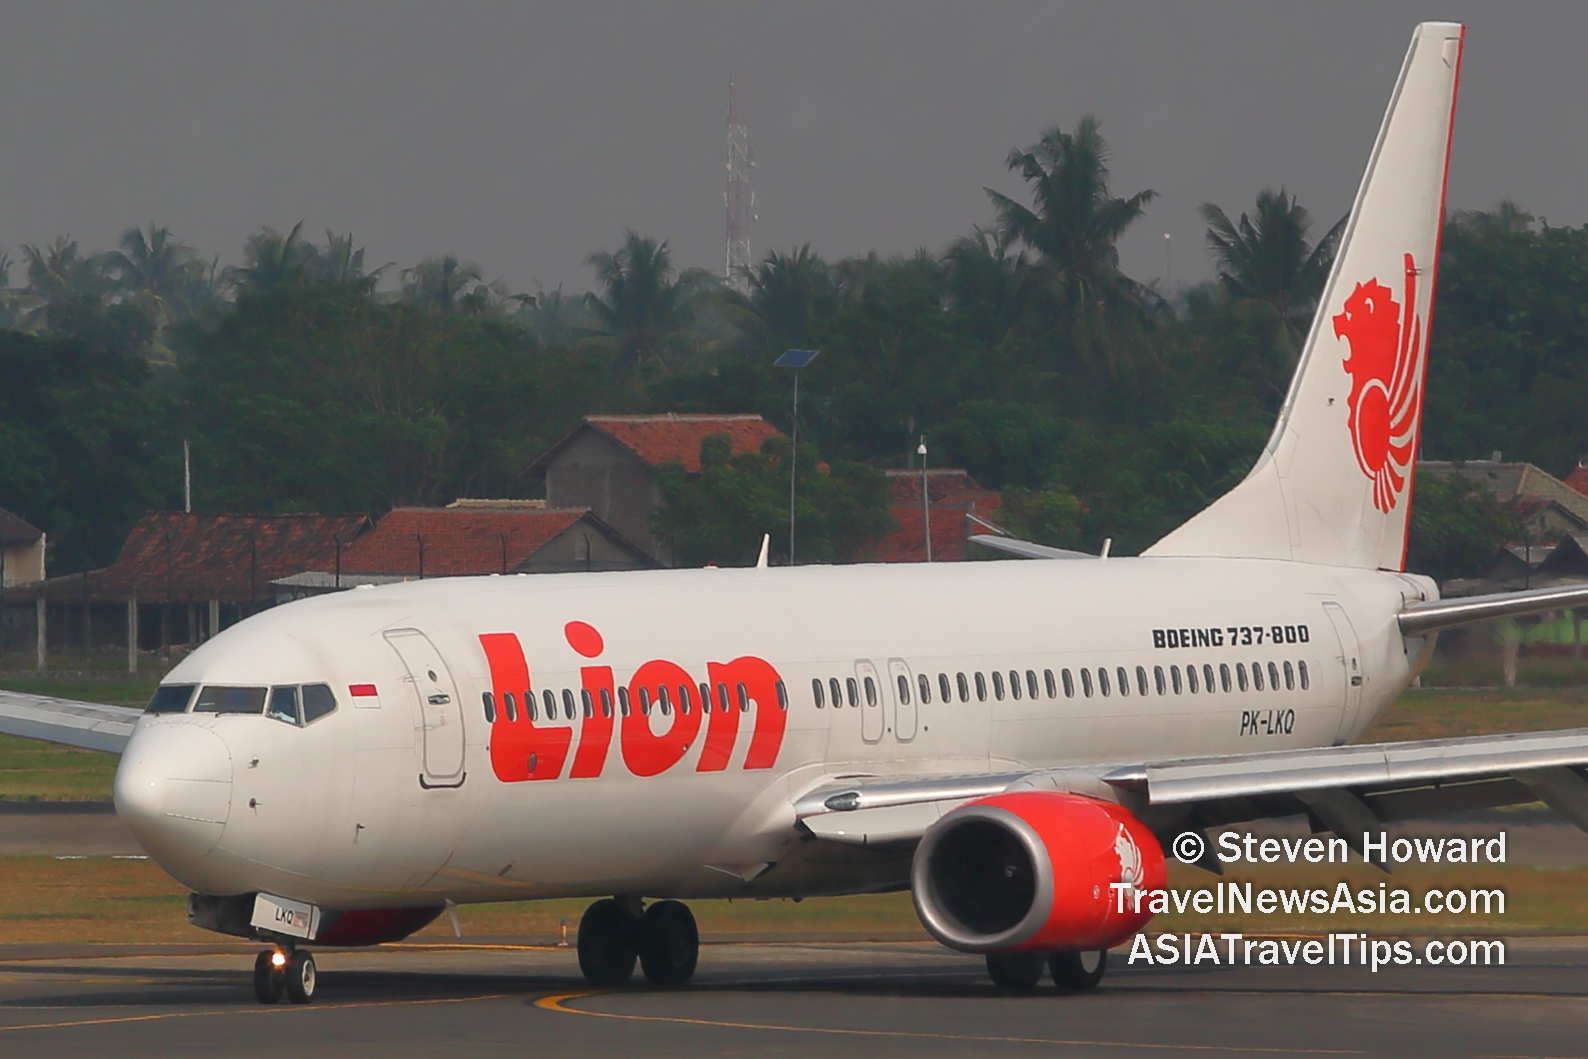 Lion Air Boeing 737 MAX reg: PK-LKQ. Picture by Steven Howard of TravelNewsAsia.com Click to enlarge.